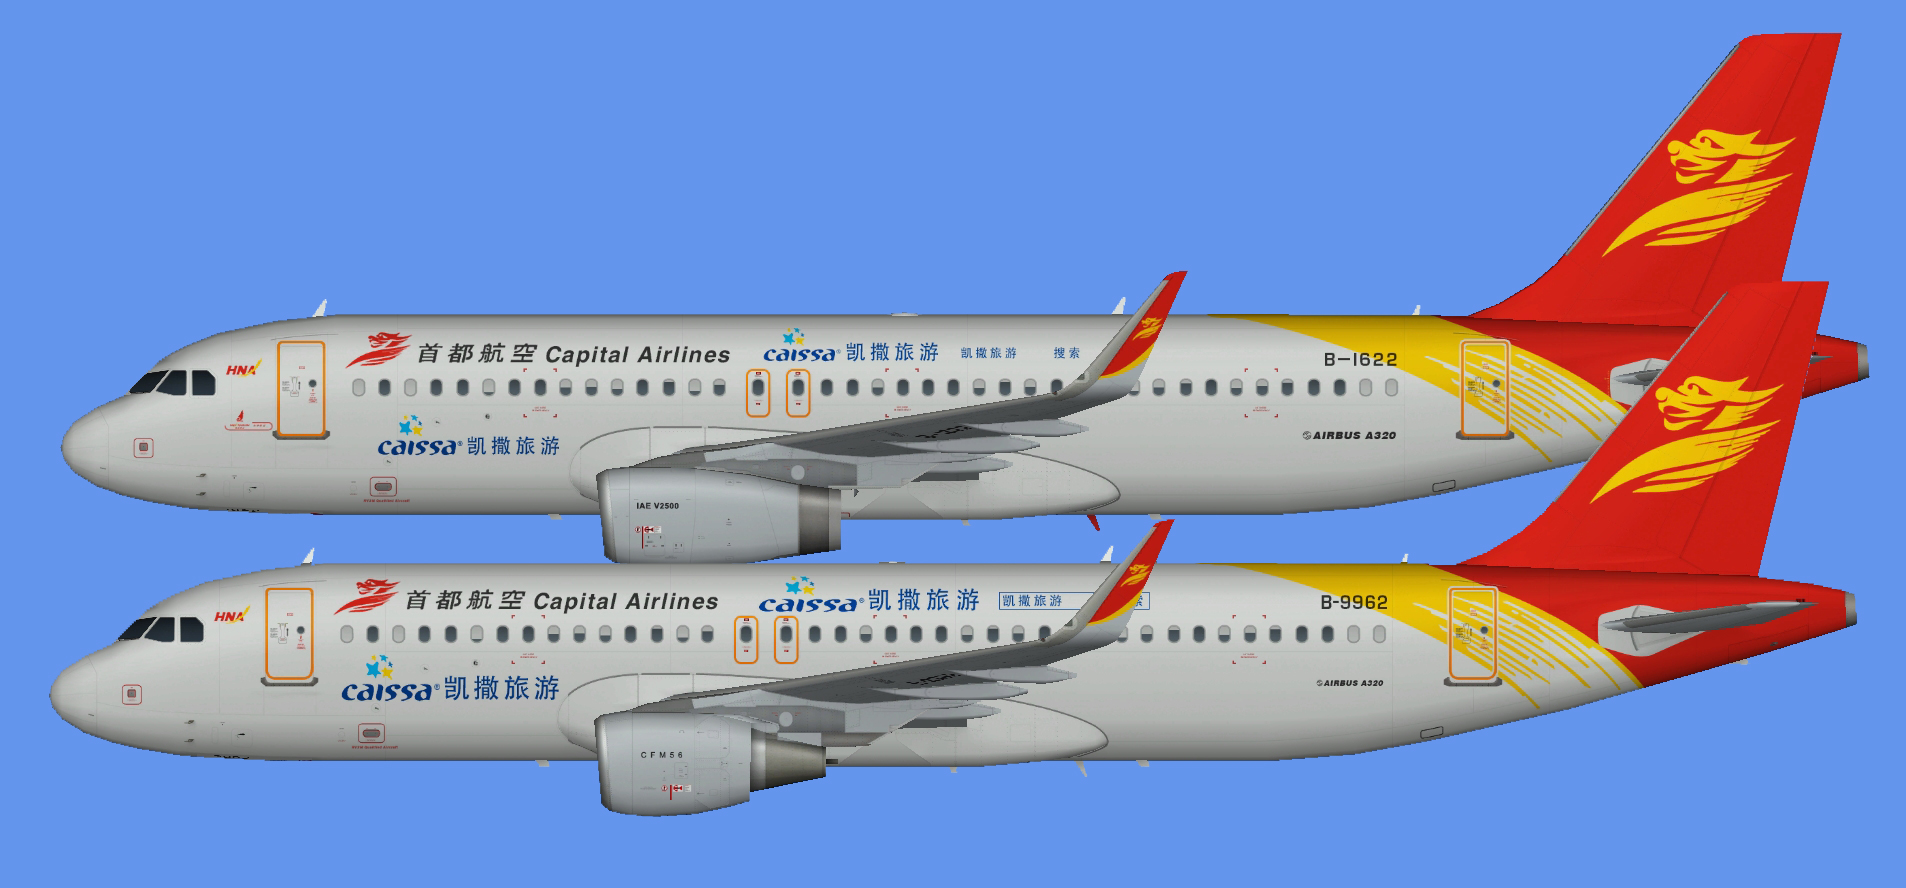 Capital Airlines Airbus A320 SL Caissa logojet